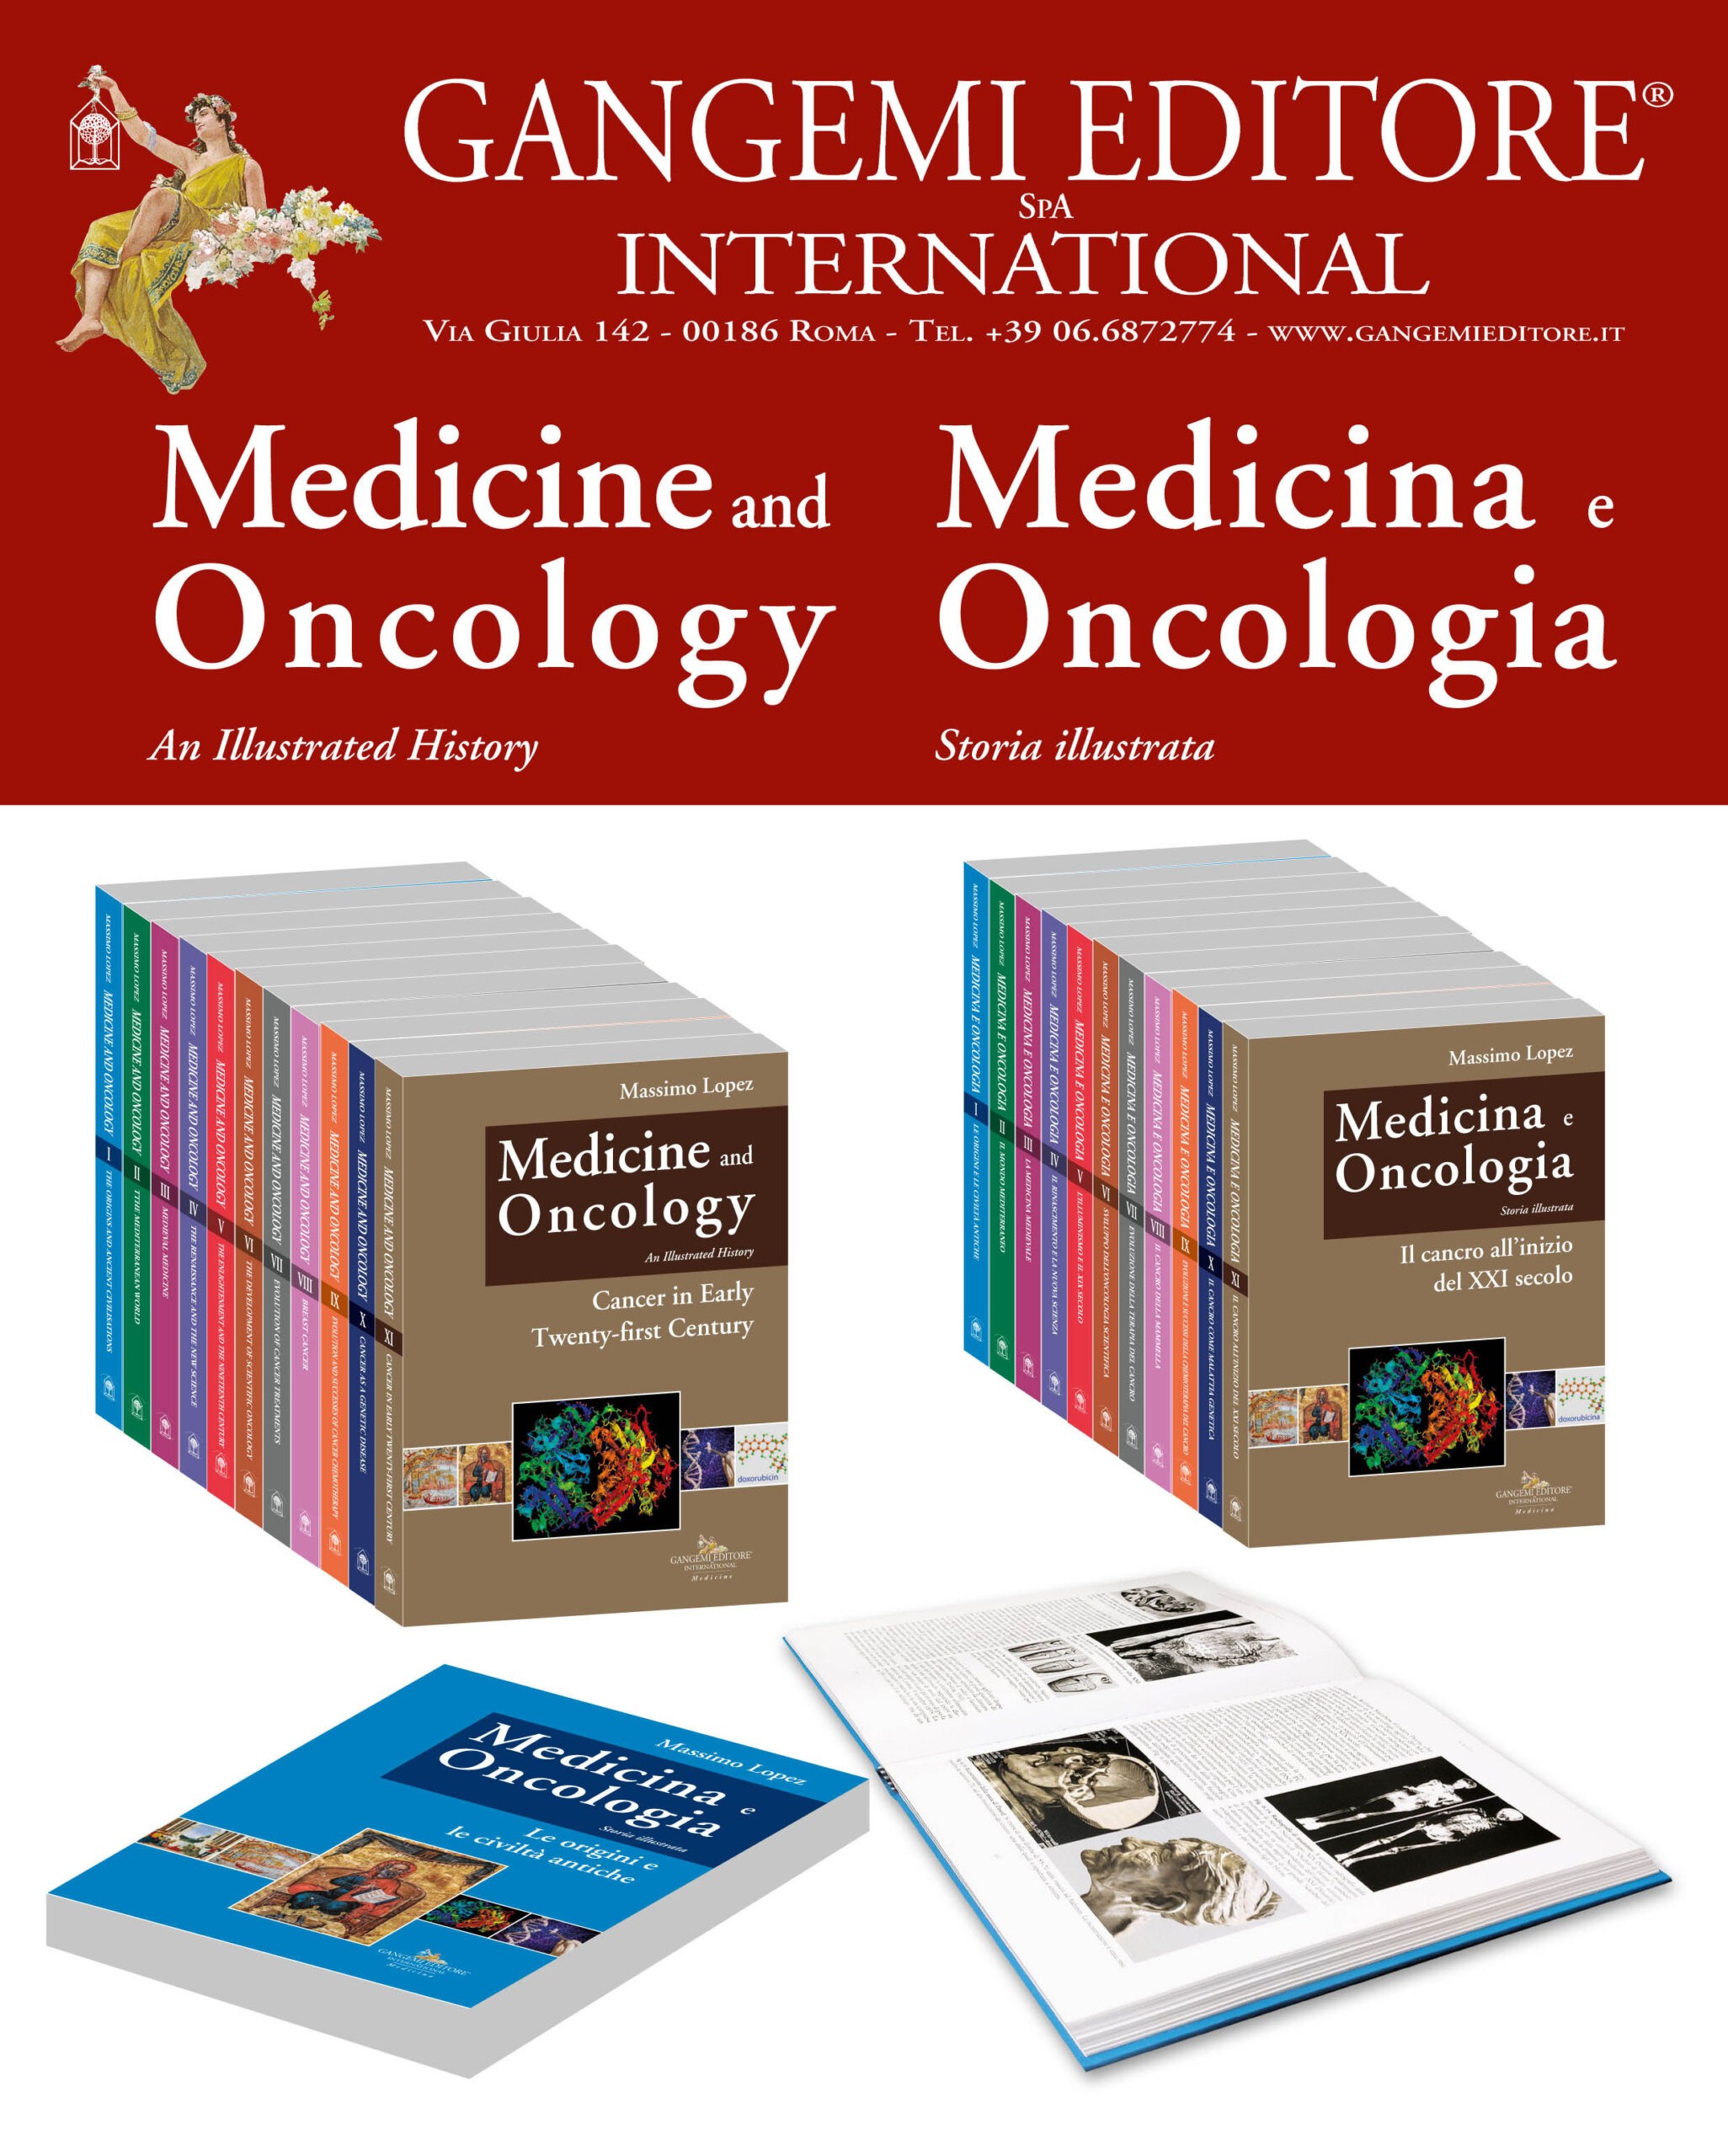 Medicine and Oncology. An illustrated history